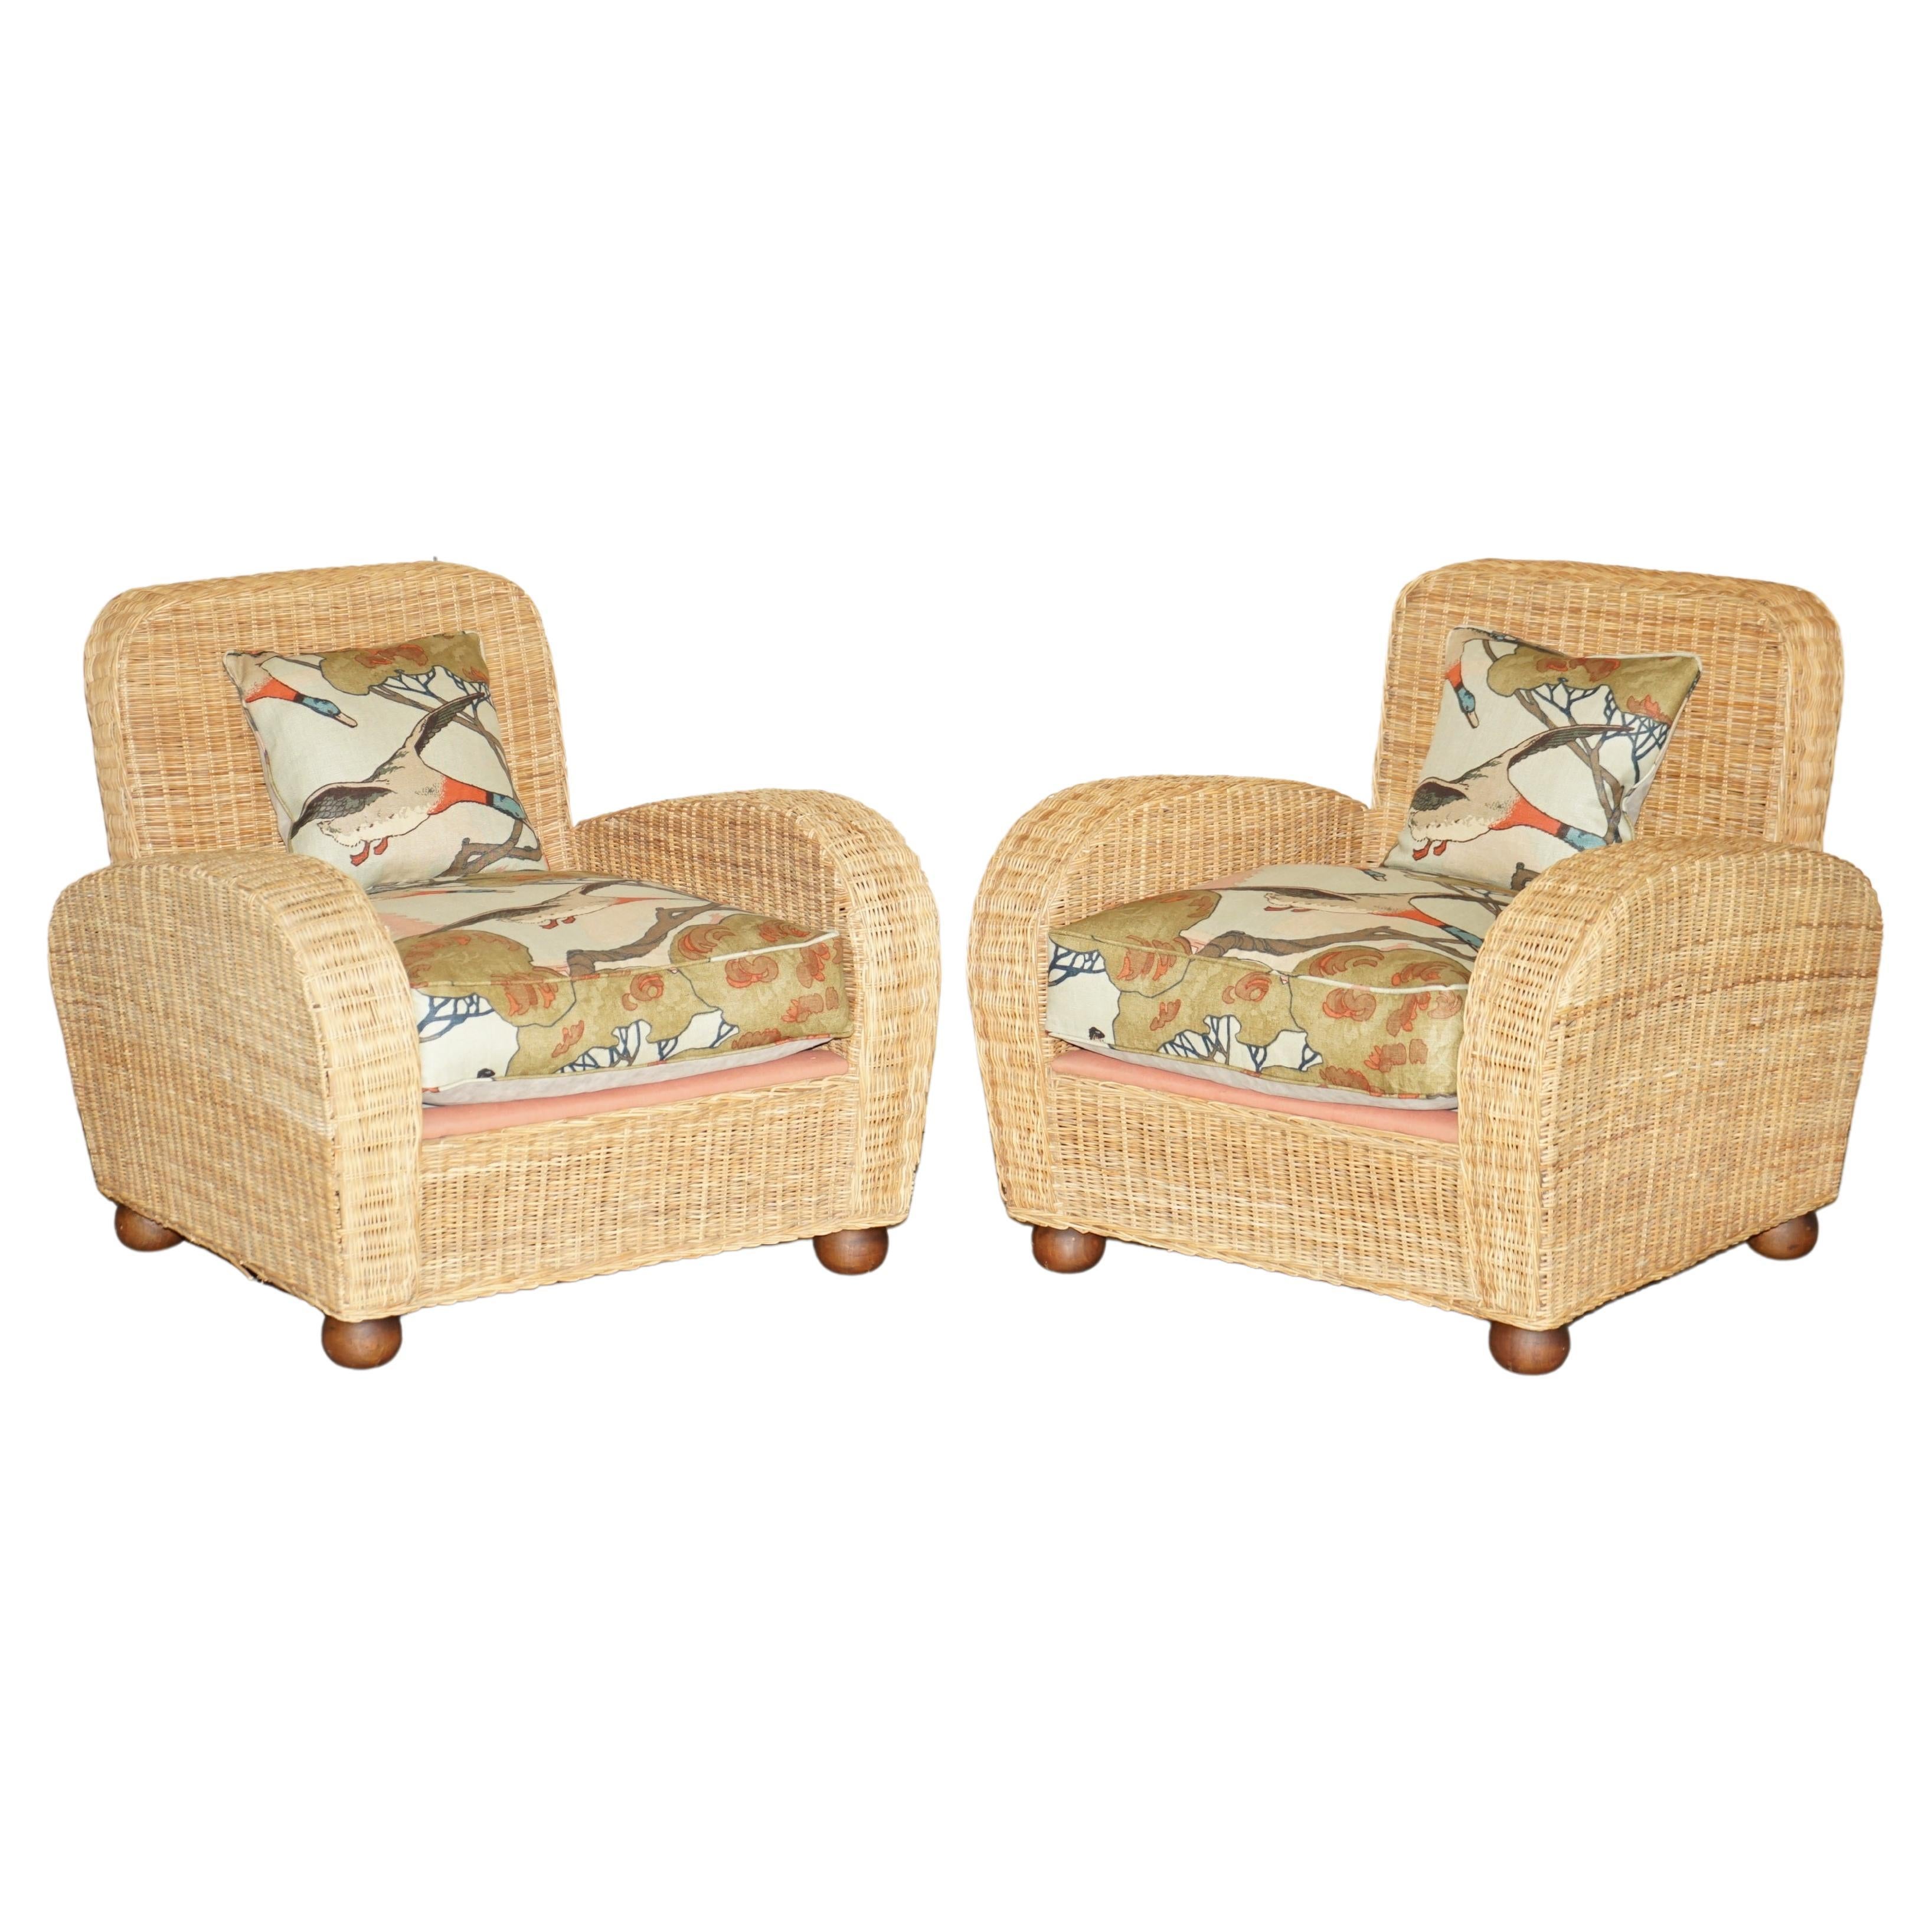 PAIR OF ART DECO STYLE WICKER CLUB ARMCHAIRS WiTH MULBERRY FLYING DUCKS CUSHIONS For Sale